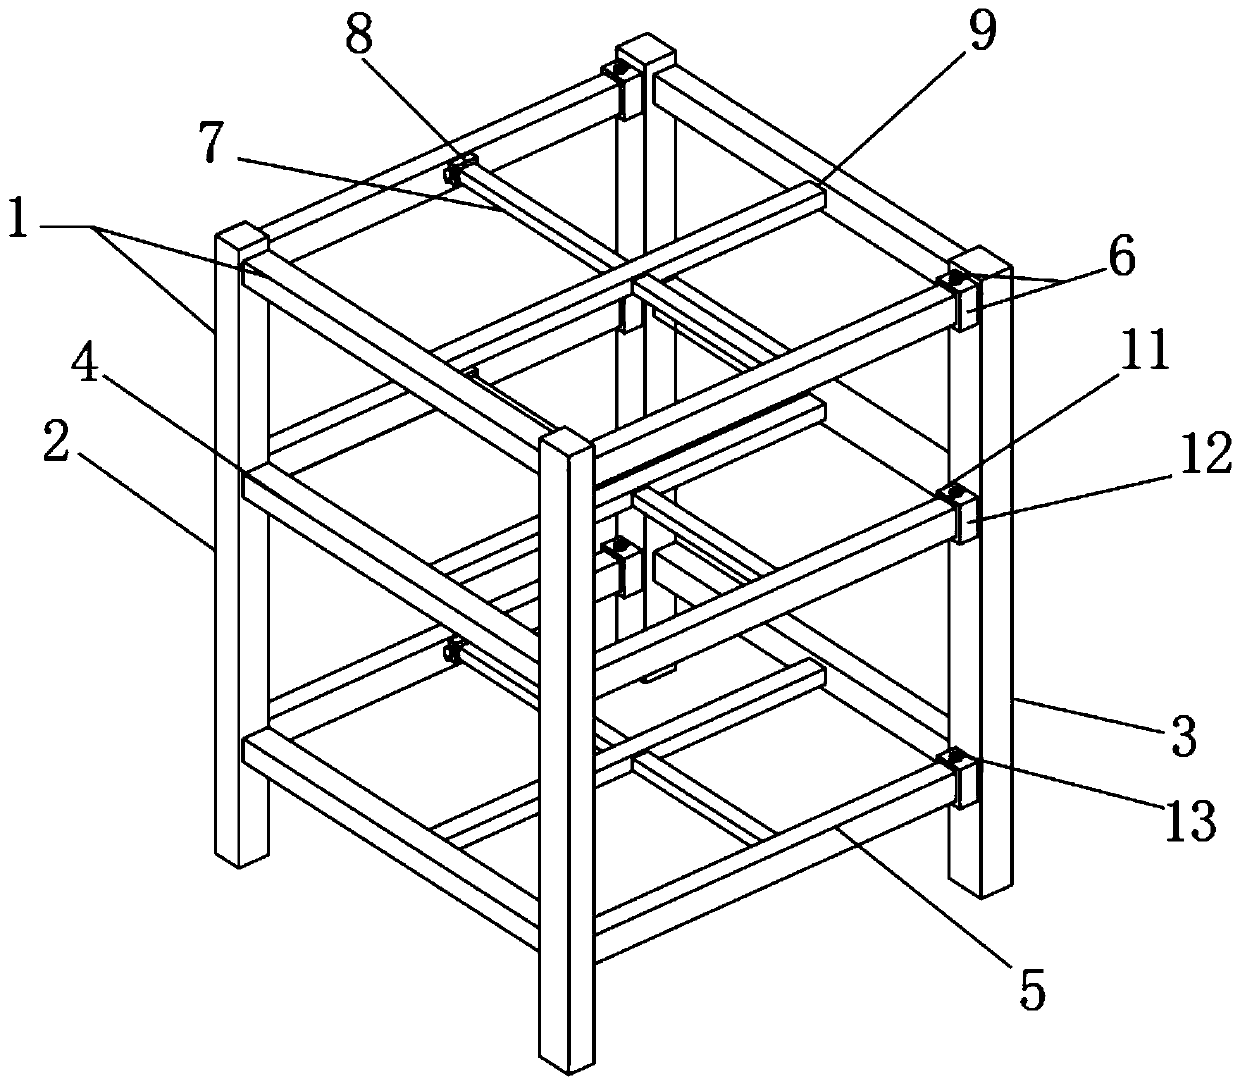 Connecting structure of steel structure cooling tower